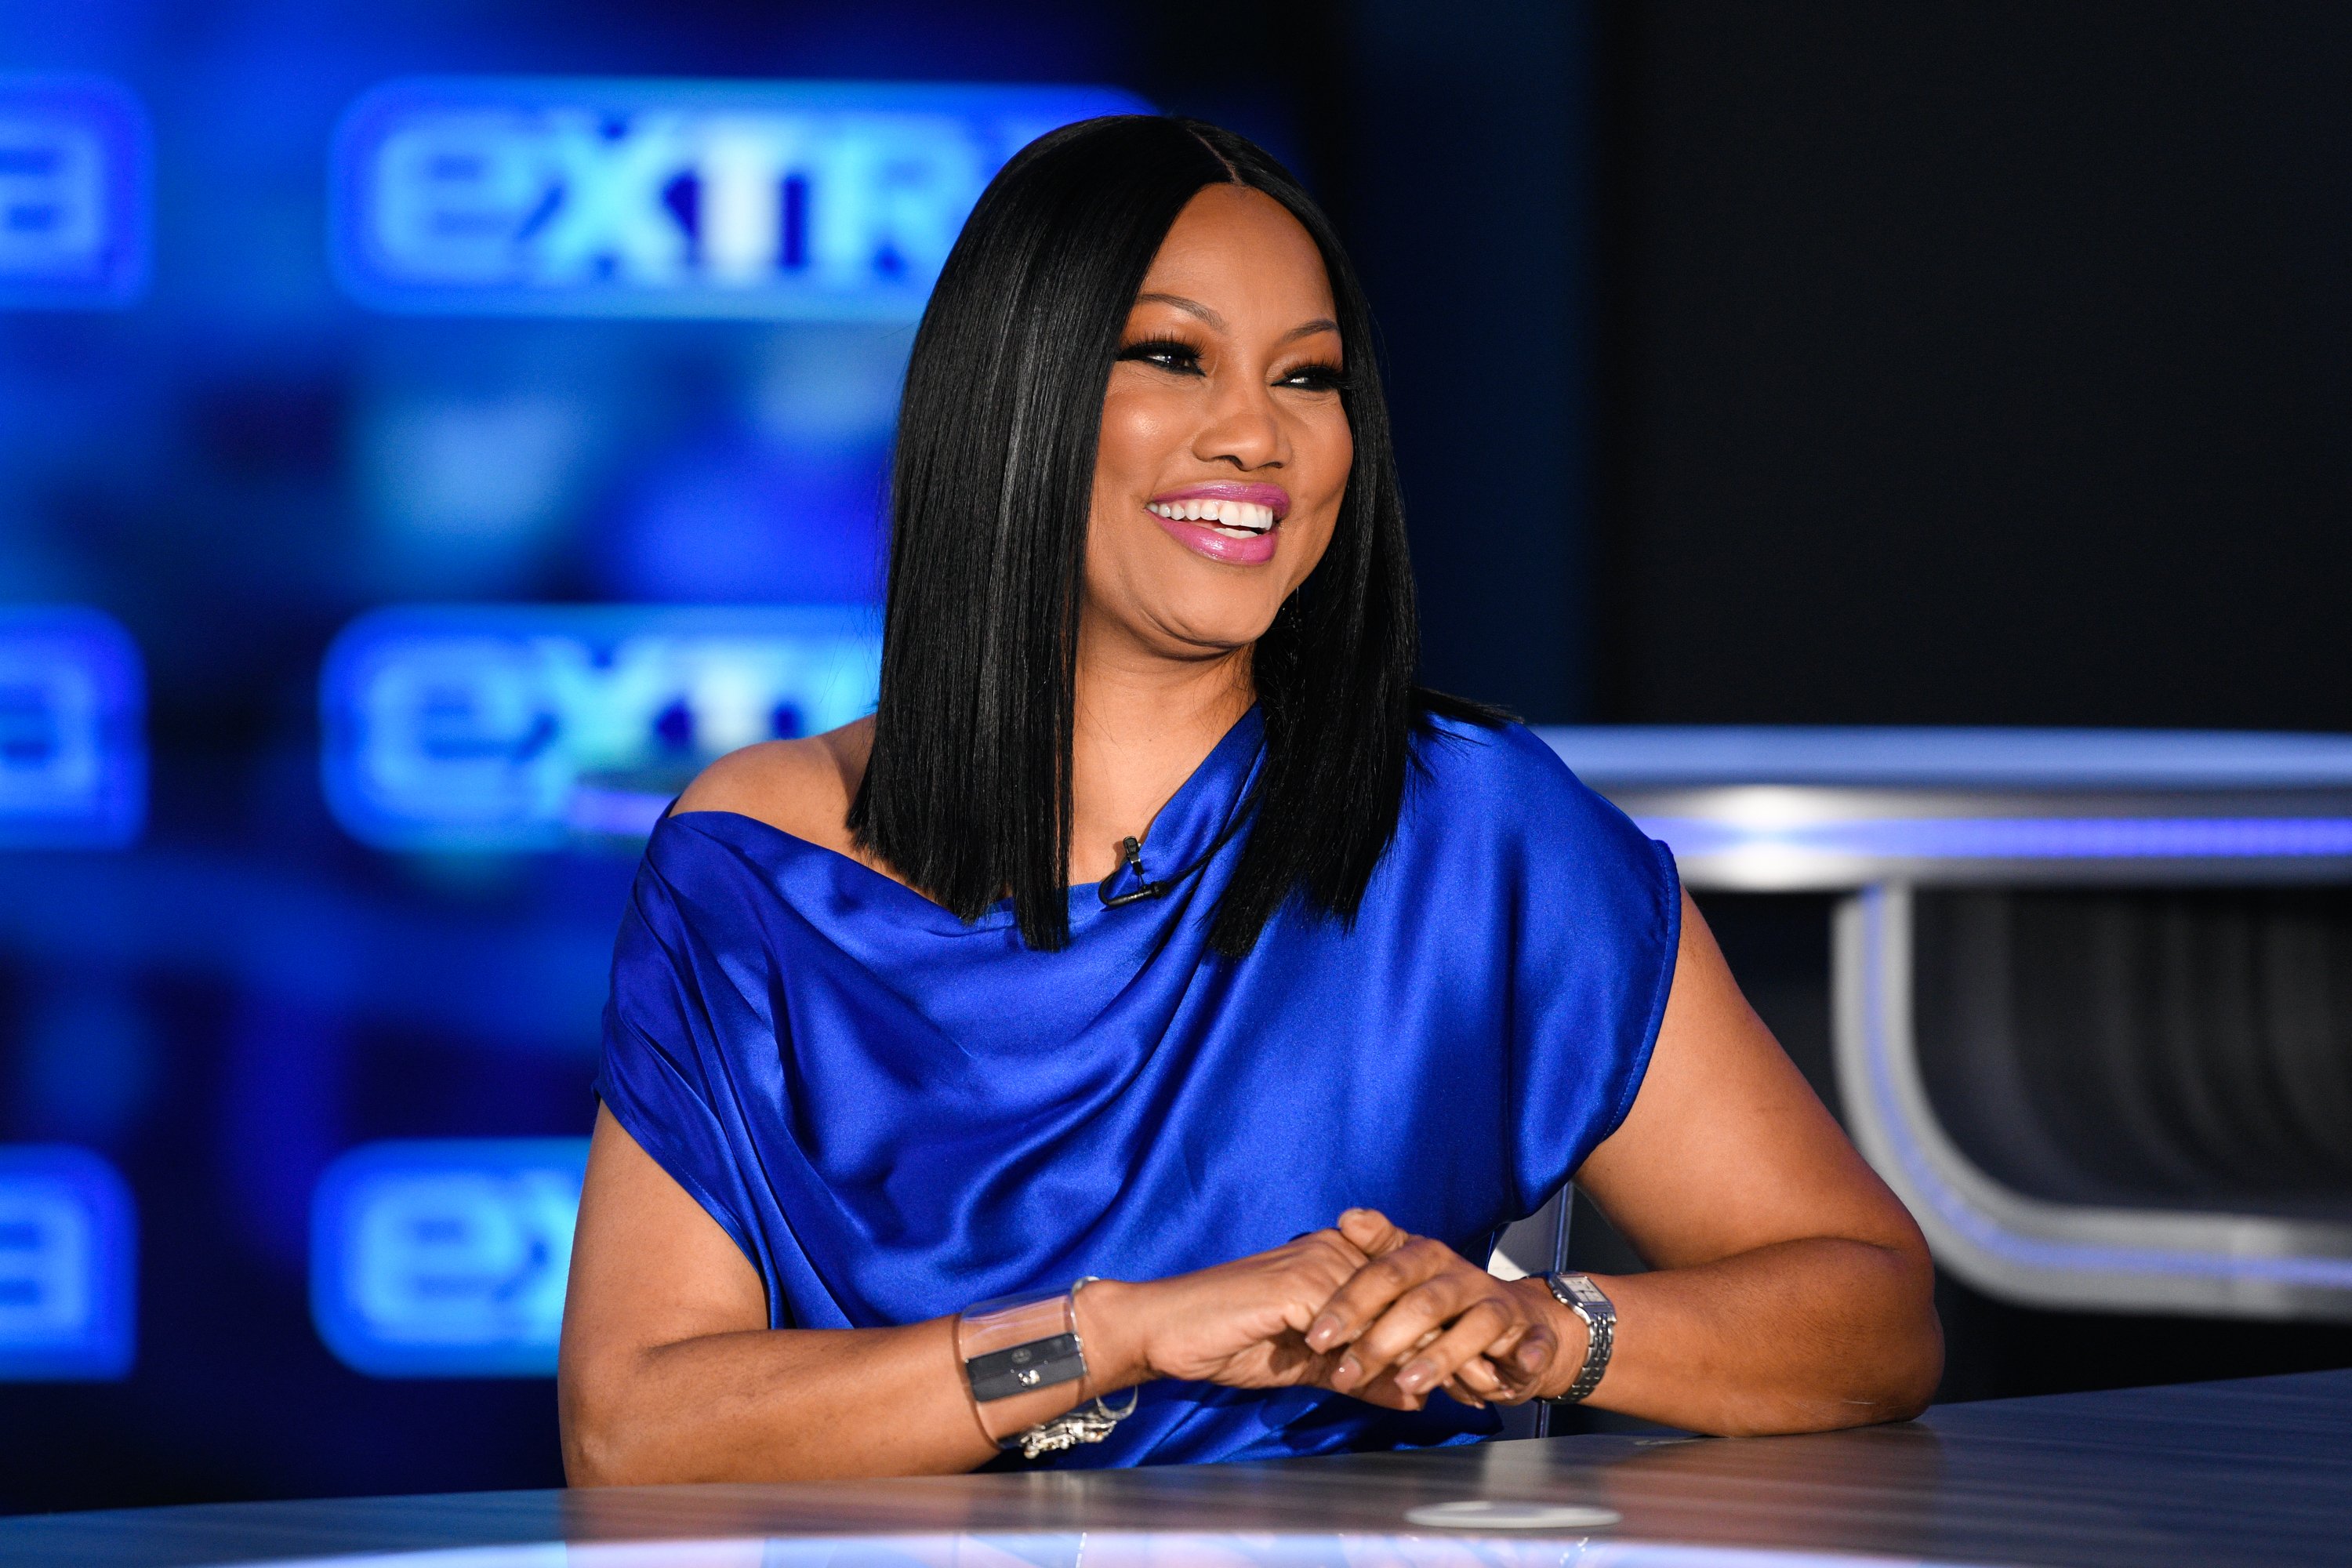 Garcelle Beauvais visits "Extra" at Burbank Studios on November 26, 2019 in Burbank, California. | Photo by Noel Vasquez/Getty Images